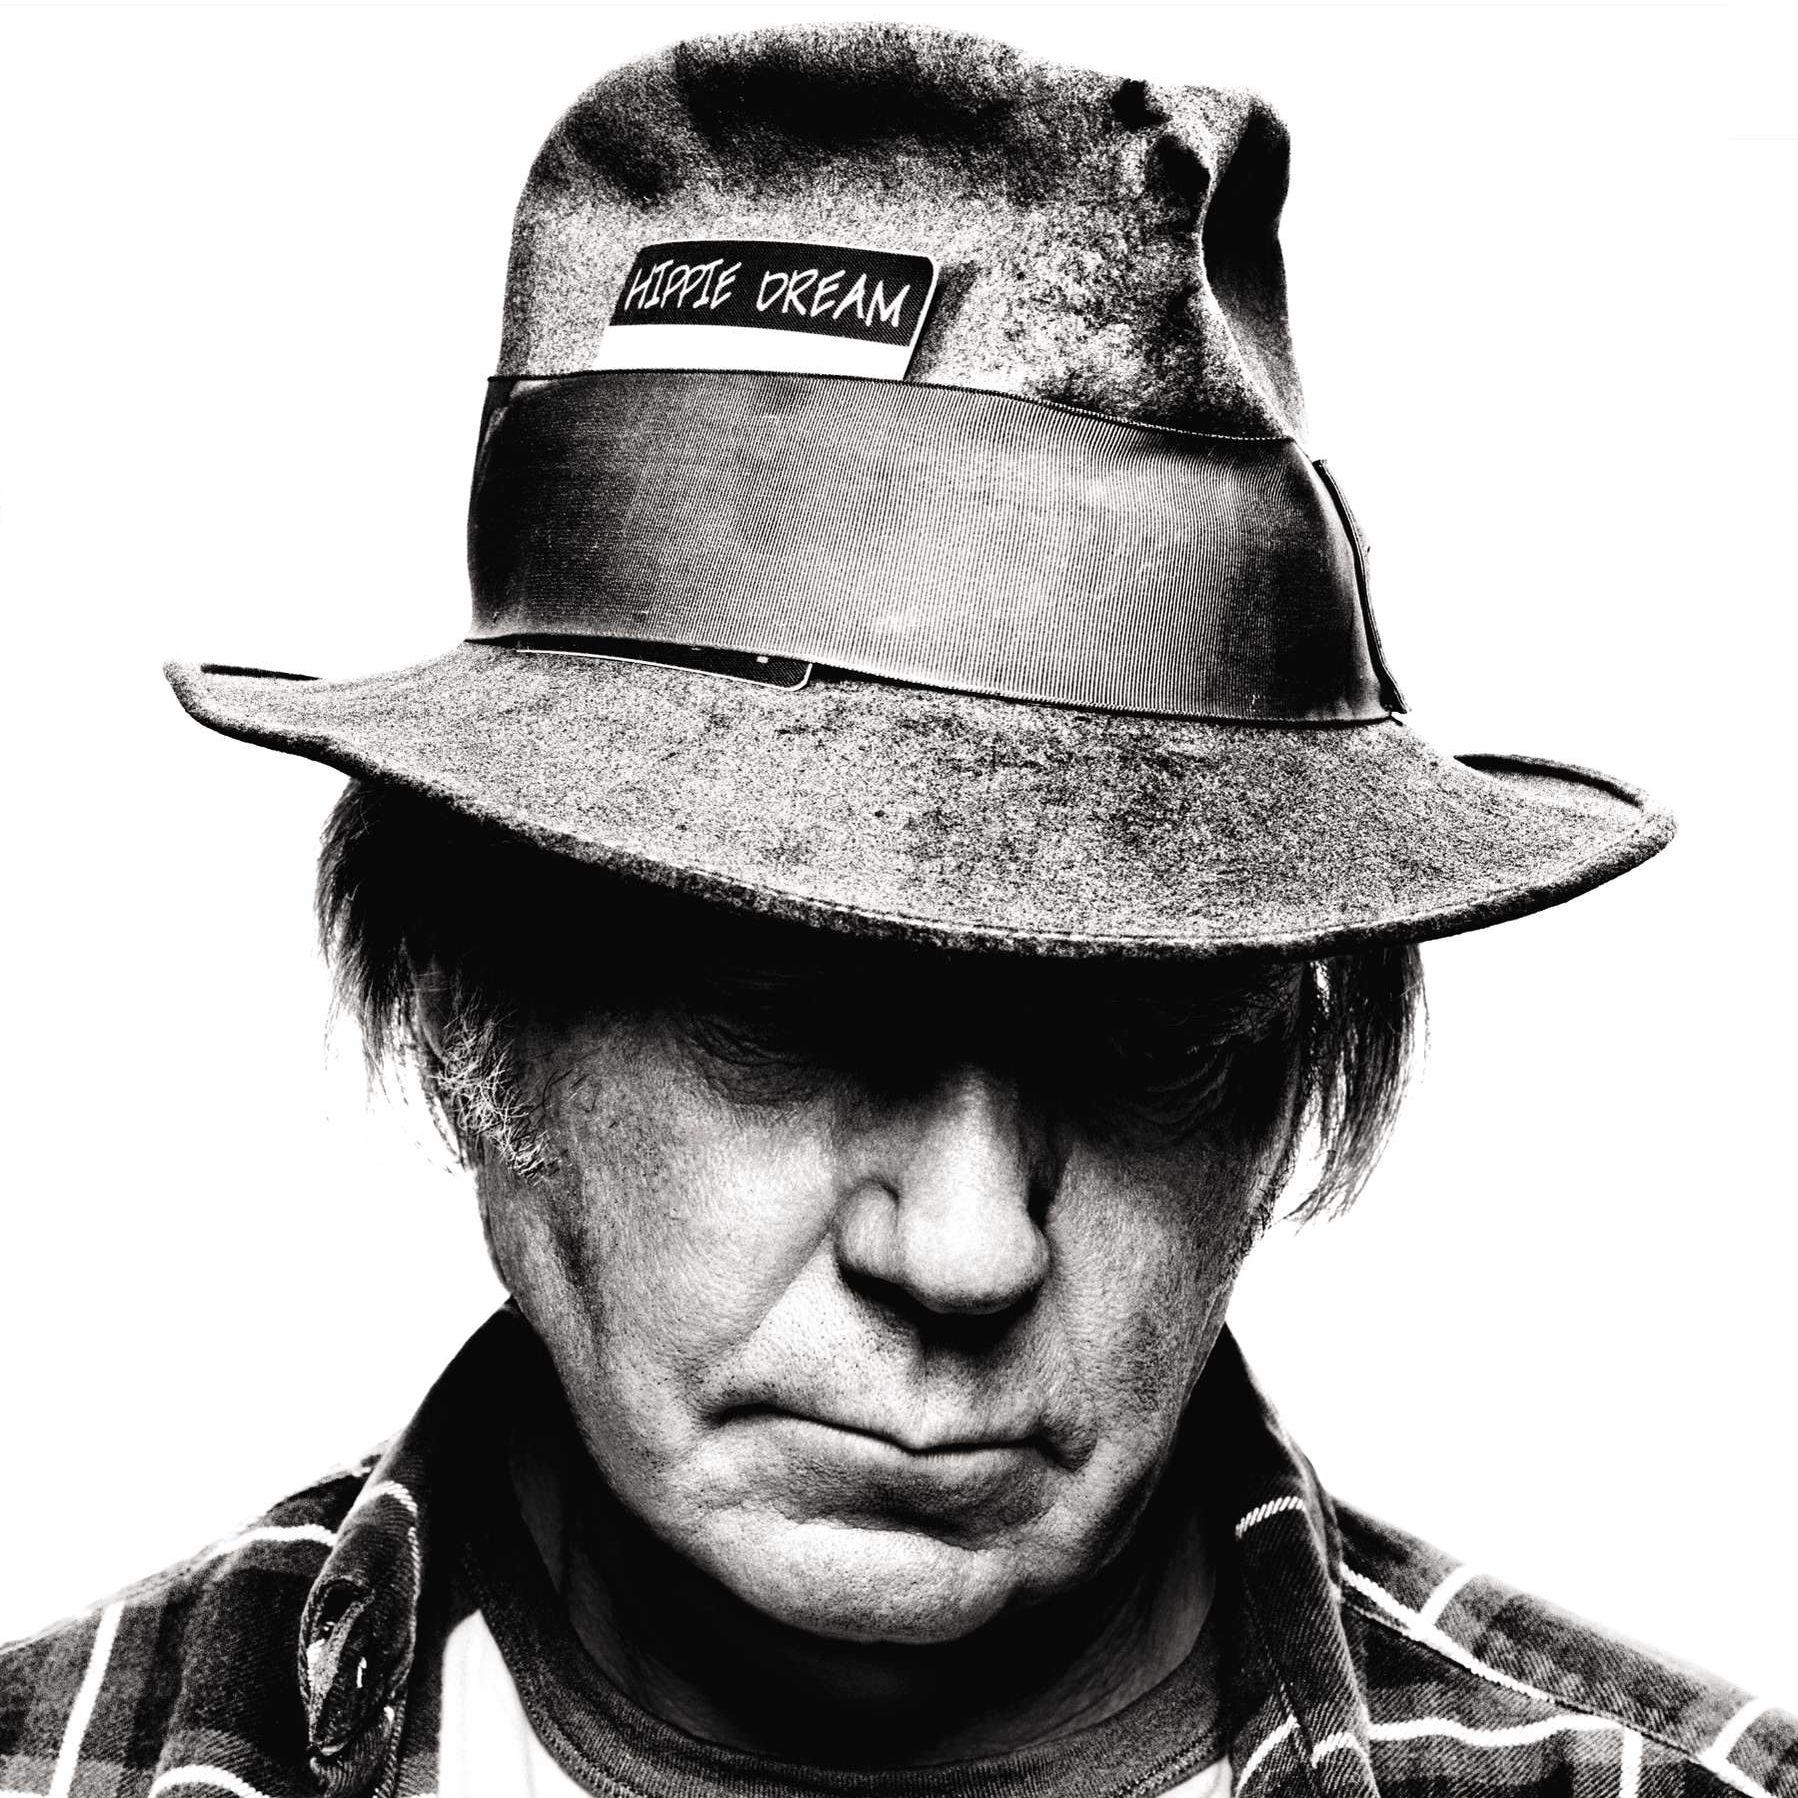 High Quality Neil Young Wallpaper. Full HD Picture